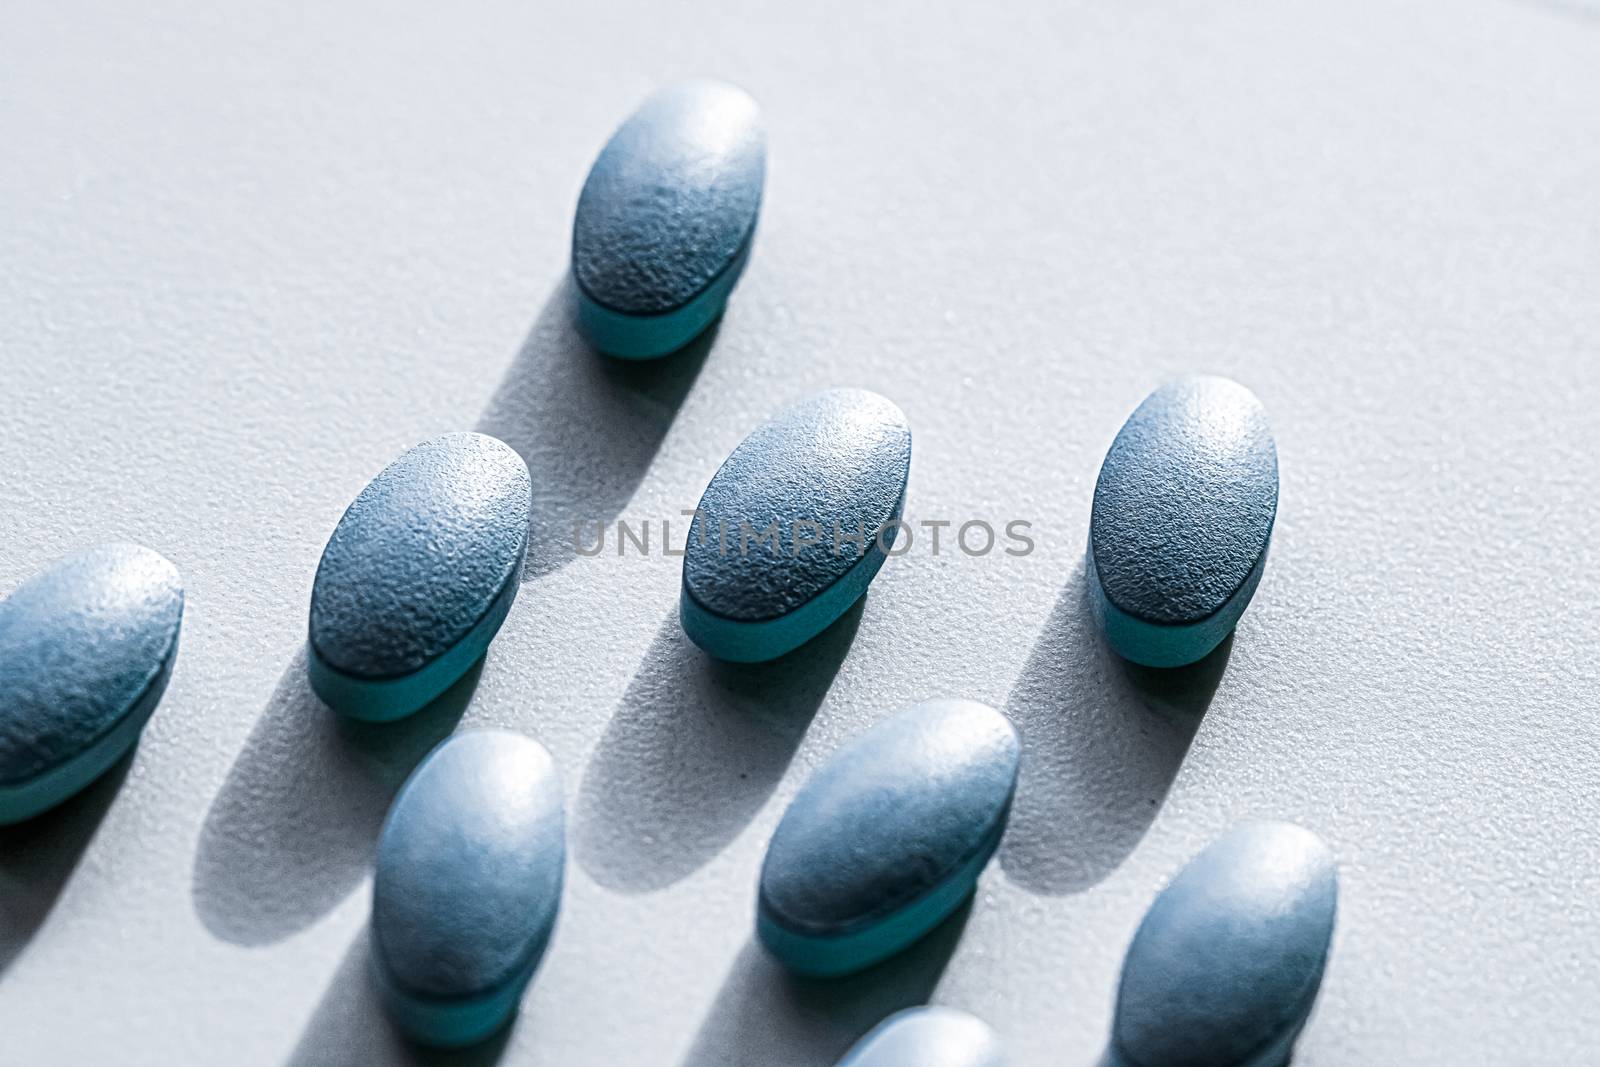 Mint pills as herbal medication, pharma brand store, probiotic drugs as nutrition healthcare or diet supplement products for pharmaceutical industry ads